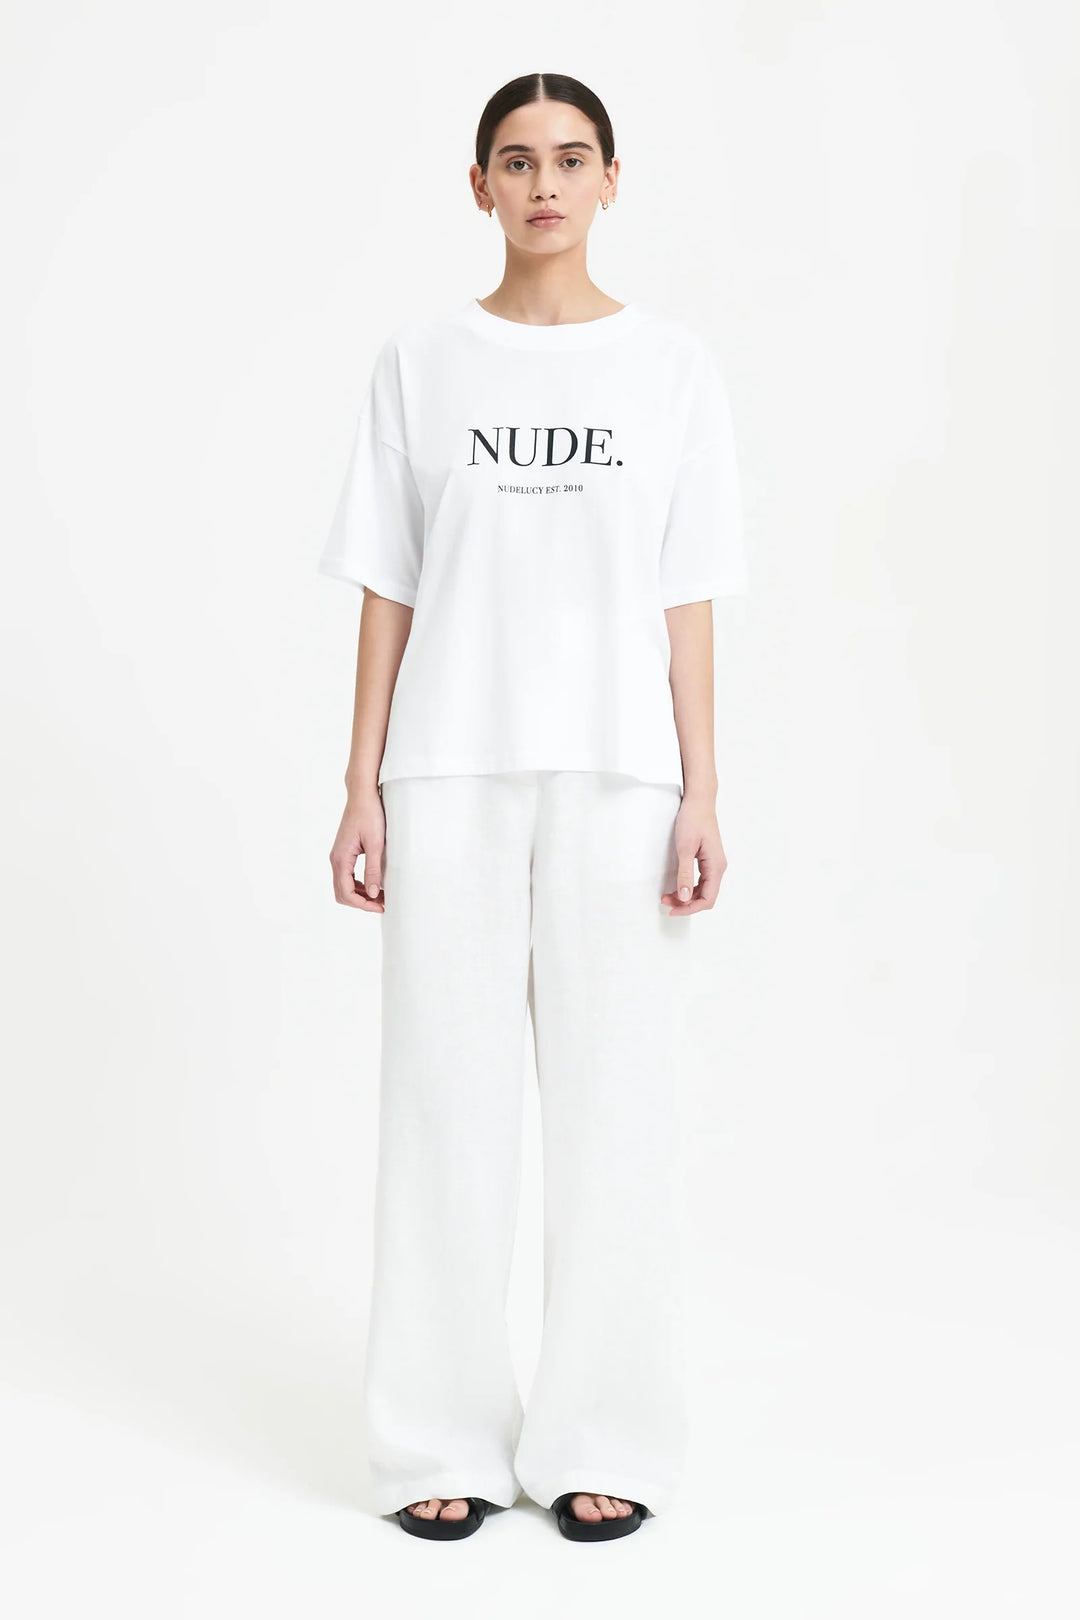 Nude Washed Tee - White